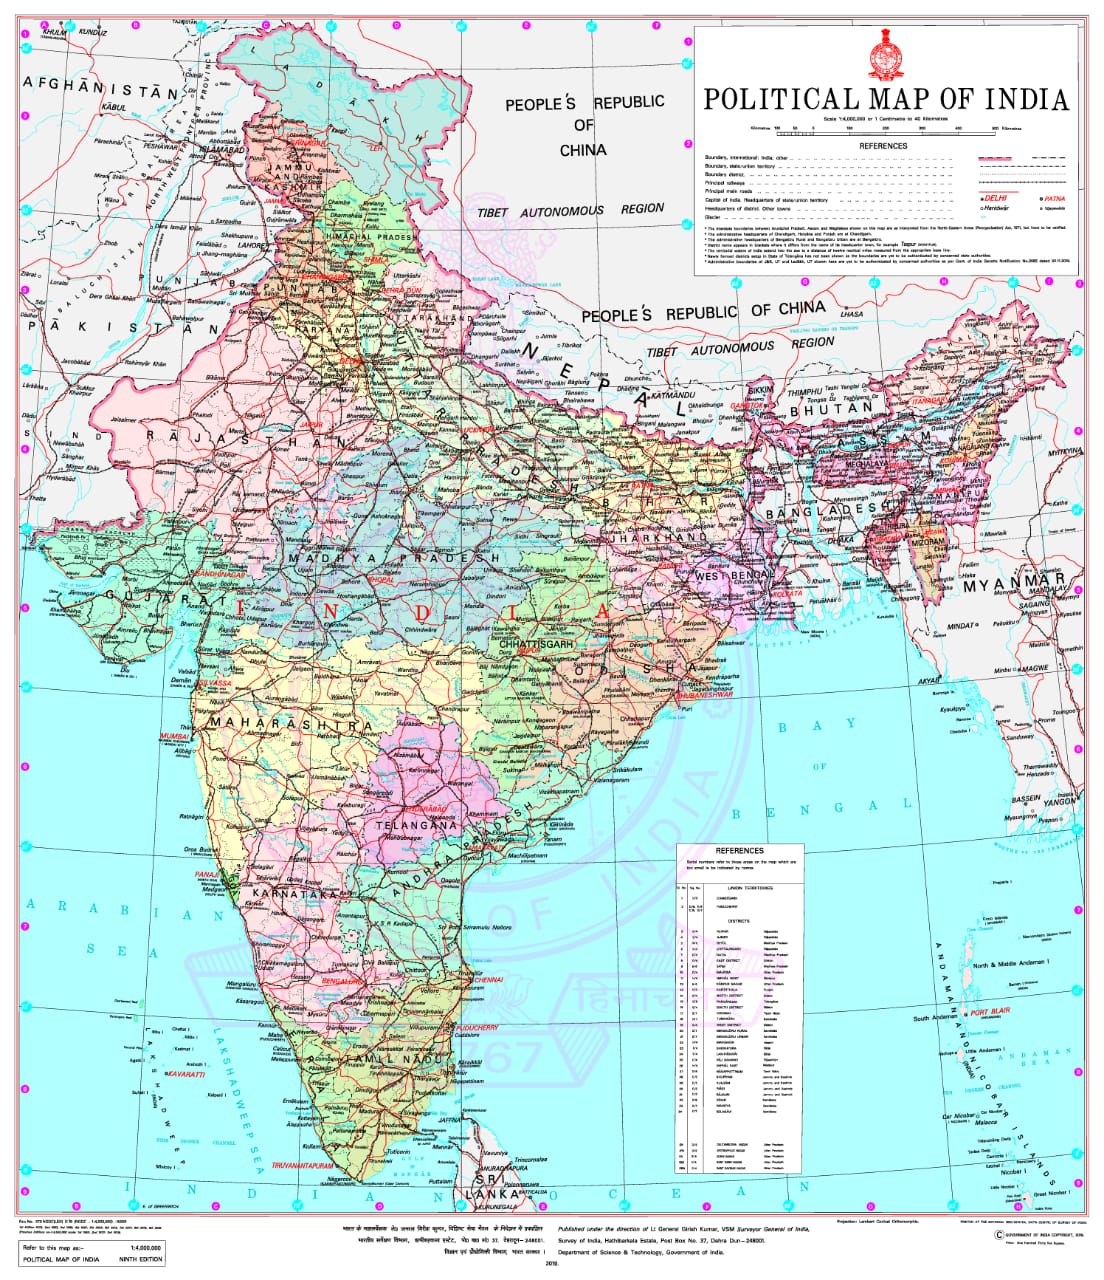 MAP OF INDIA 